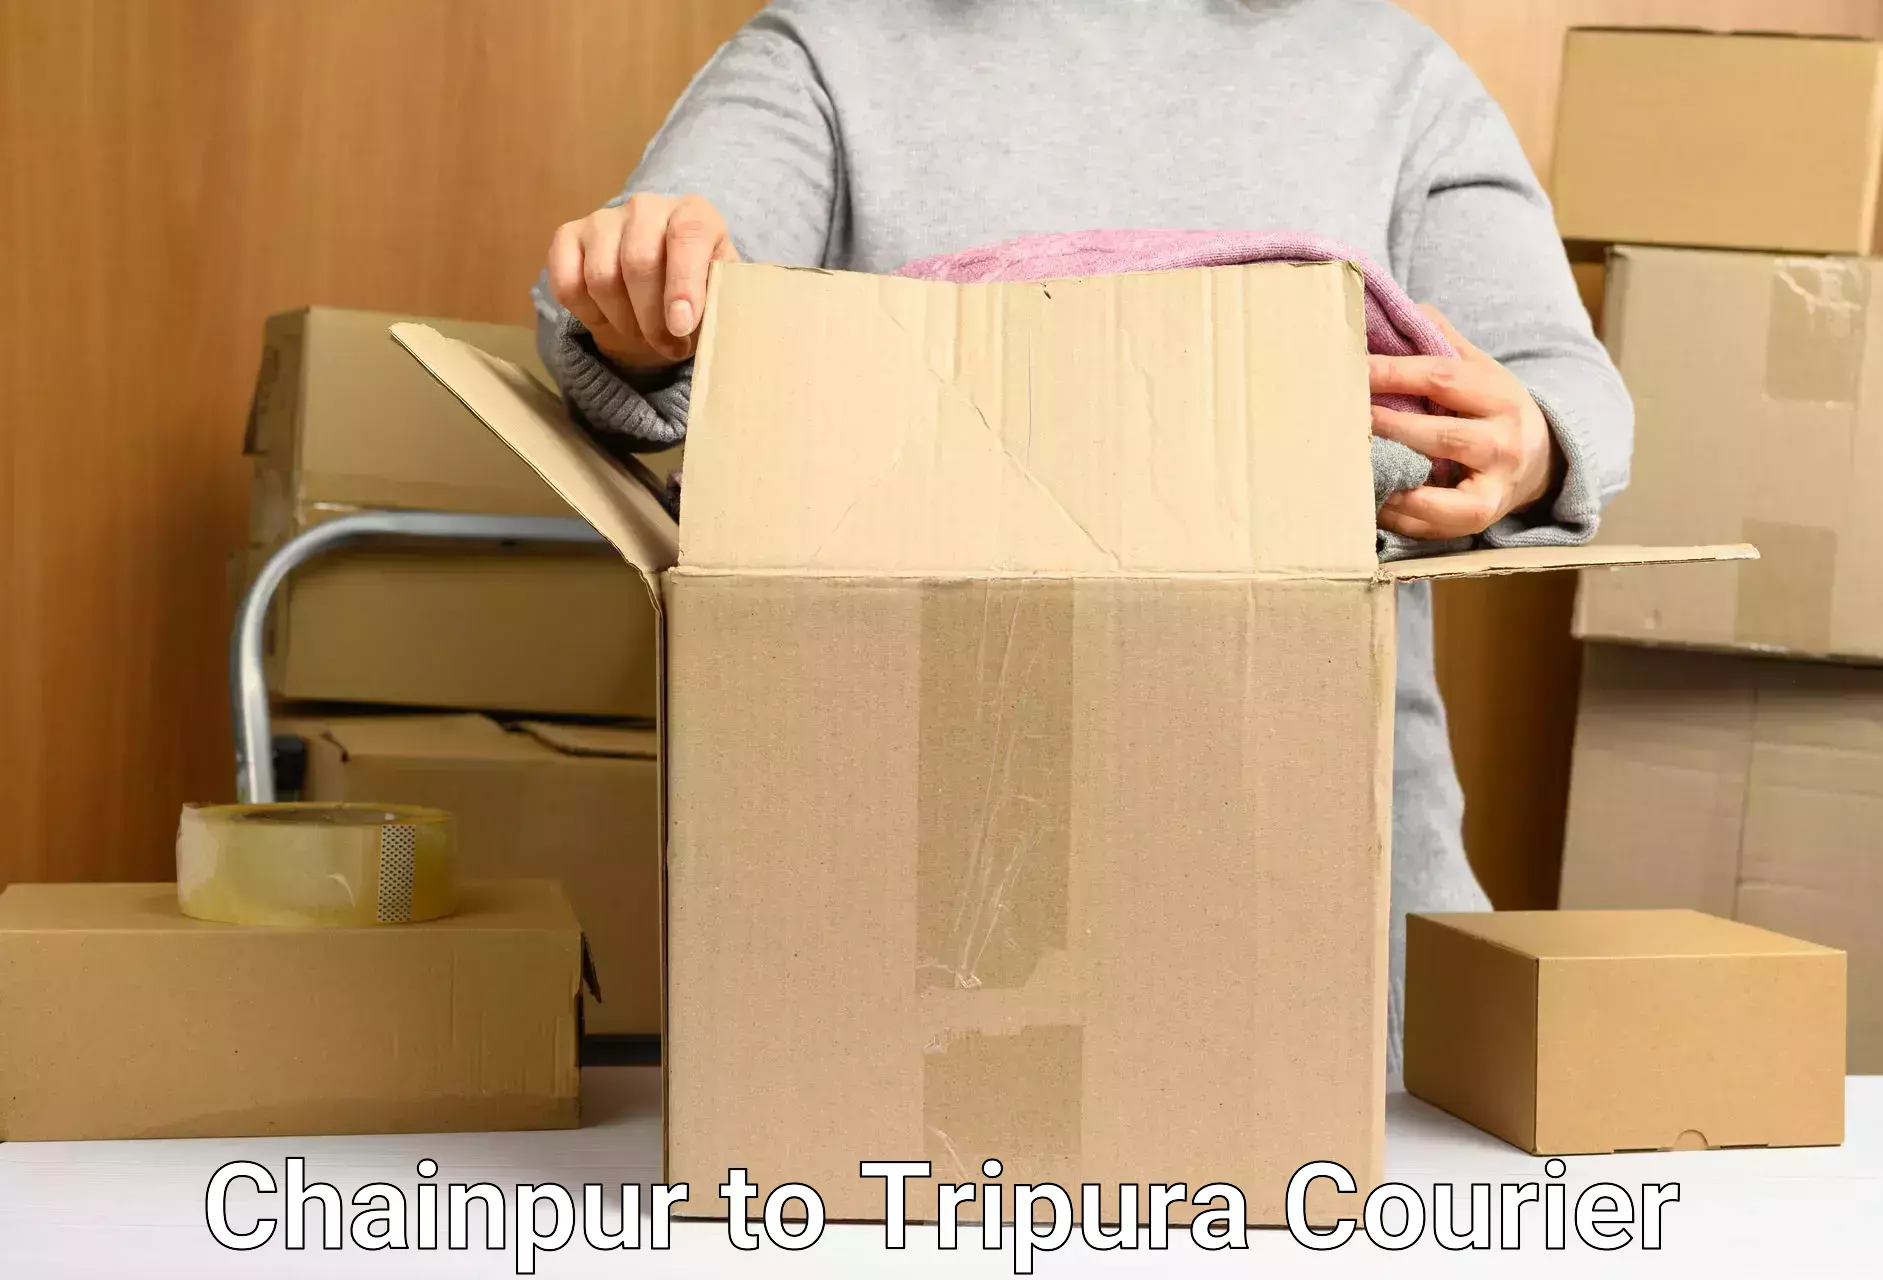 Next-generation courier services Chainpur to Tripura